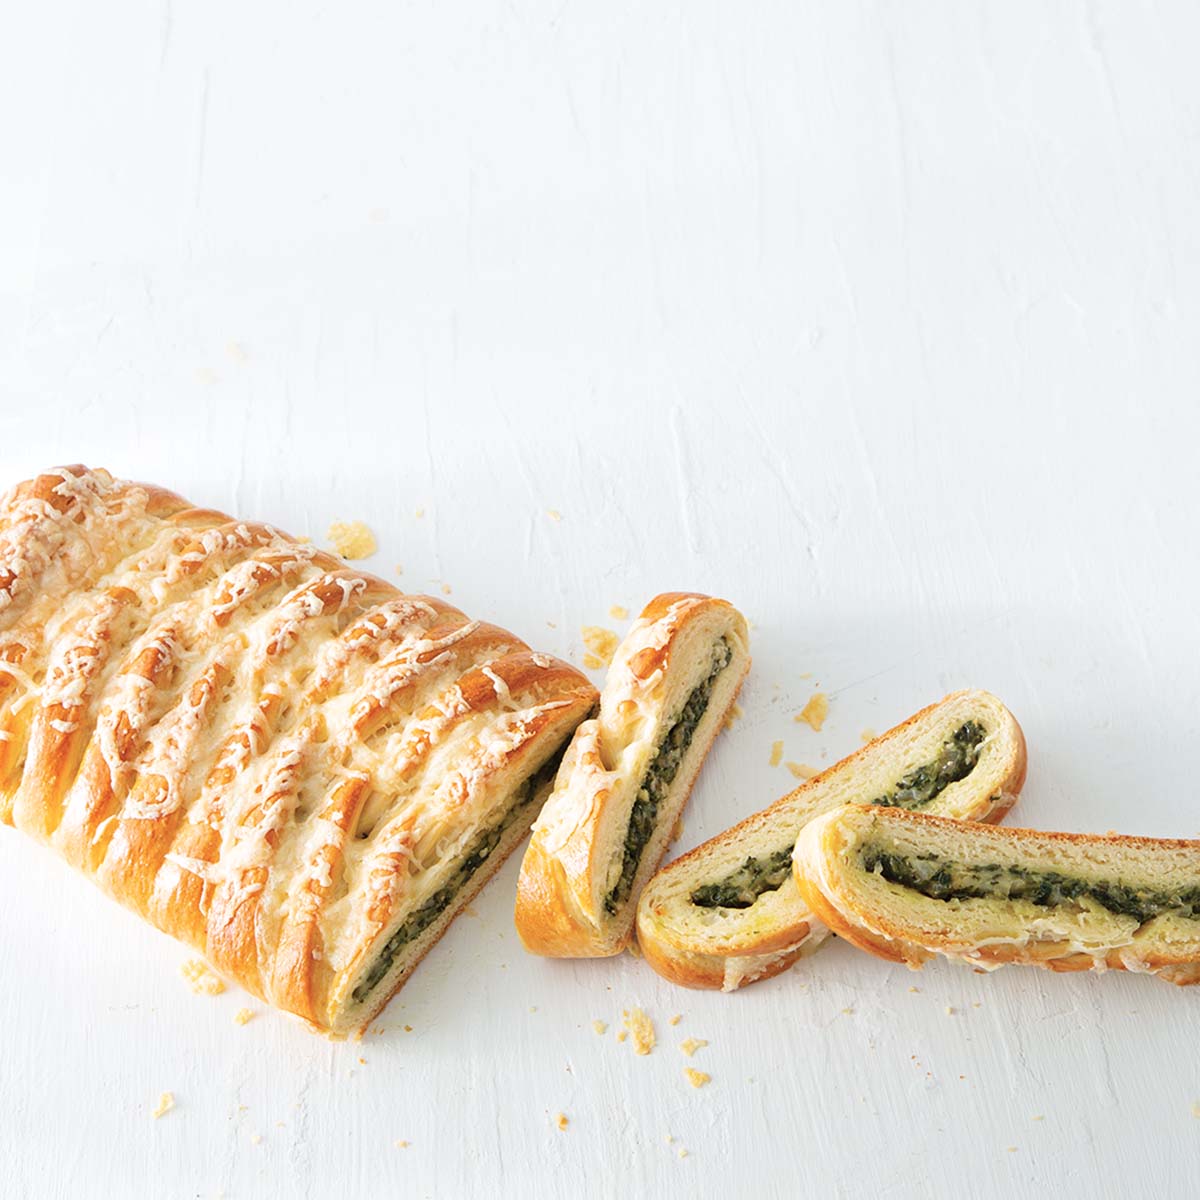 Spinach dip baked inside a woven loaf. 🔥 Spinach & Onion Braided Bread: bit.ly/3PdoqFG